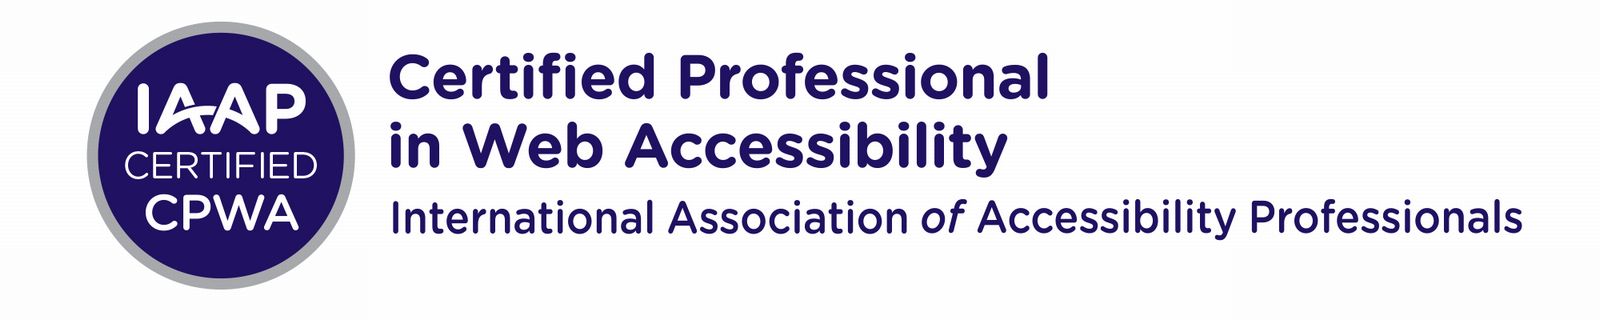 IAAP CPWA small circular badge and horizontal name logo for International Association of Accessibility Professionals (IAAP) Certified Professional in Web Accessibility (CPWA) credential. To the left is a dark blue circle with three lines of centered white text that read: IAAP Certified CPWA. There is a smaller silver circle that surrounds the dark blue inner circle that designates the CPWA credential color scheme. To the right, three lines of dark blue text. Top text reads Certified Professional, second lin